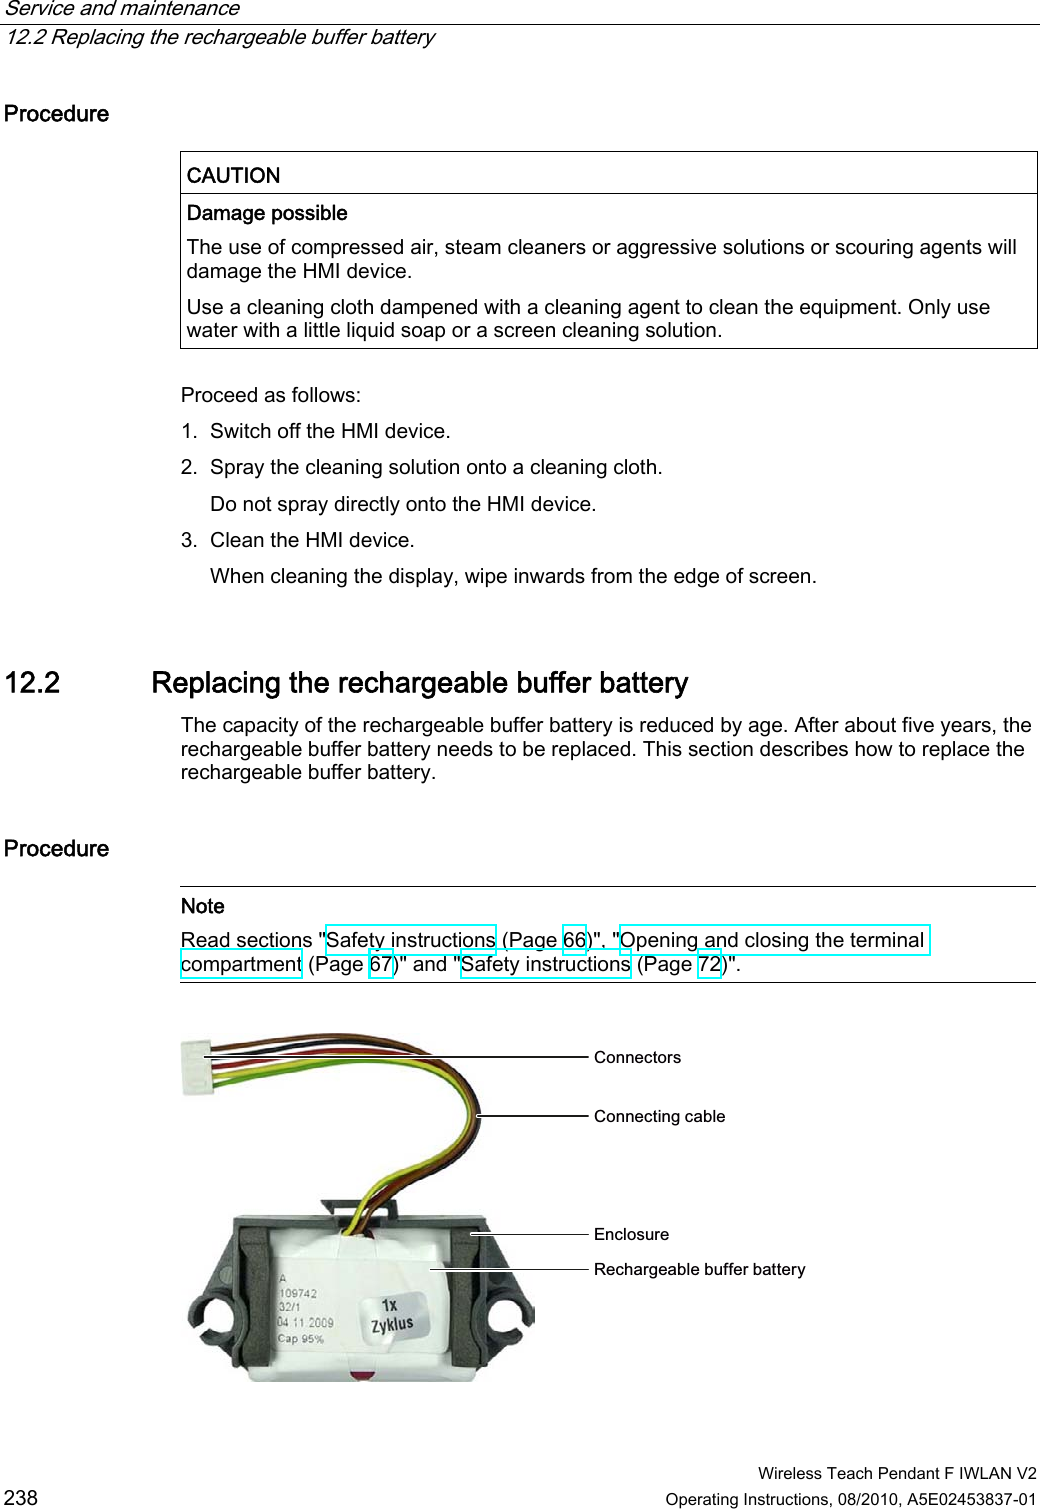 Service and maintenance   12.2 Replacing the rechargeable buffer battery  Wireless Teach Pendant F IWLAN V2 238 Operating Instructions, 08/2010, A5E02453837-01 Procedure  CAUTION  Damage possible The use of compressed air, steam cleaners or aggressive solutions or scouring agents will damage the HMI device. Use a cleaning cloth dampened with a cleaning agent to clean the equipment. Only use water with a little liquid soap or a screen cleaning solution.  Proceed as follows: 1. Switch off the HMI device. 2. Spray the cleaning solution onto a cleaning cloth. Do not spray directly onto the HMI device. 3. Clean the HMI device. When cleaning the display, wipe inwards from the edge of screen.  12.2 Replacing the rechargeable buffer battery The capacity of the rechargeable buffer battery is reduced by age. After about five years, the rechargeable buffer battery needs to be replaced. This section describes how to replace the rechargeable buffer battery. Procedure   Note Read sections &quot;Safety instructions (Page 66)&quot;, &quot;Opening and closing the terminal compartment (Page 67)&quot; and &quot;Safety instructions (Page 72)&quot;.  &amp;RQQHFWLQJFDEOH(QFORVXUH5HFKDUJHDEOHEXIIHUEDWWHU\&amp;RQQHFWRUV PRELIMINARY II 1.7.2010